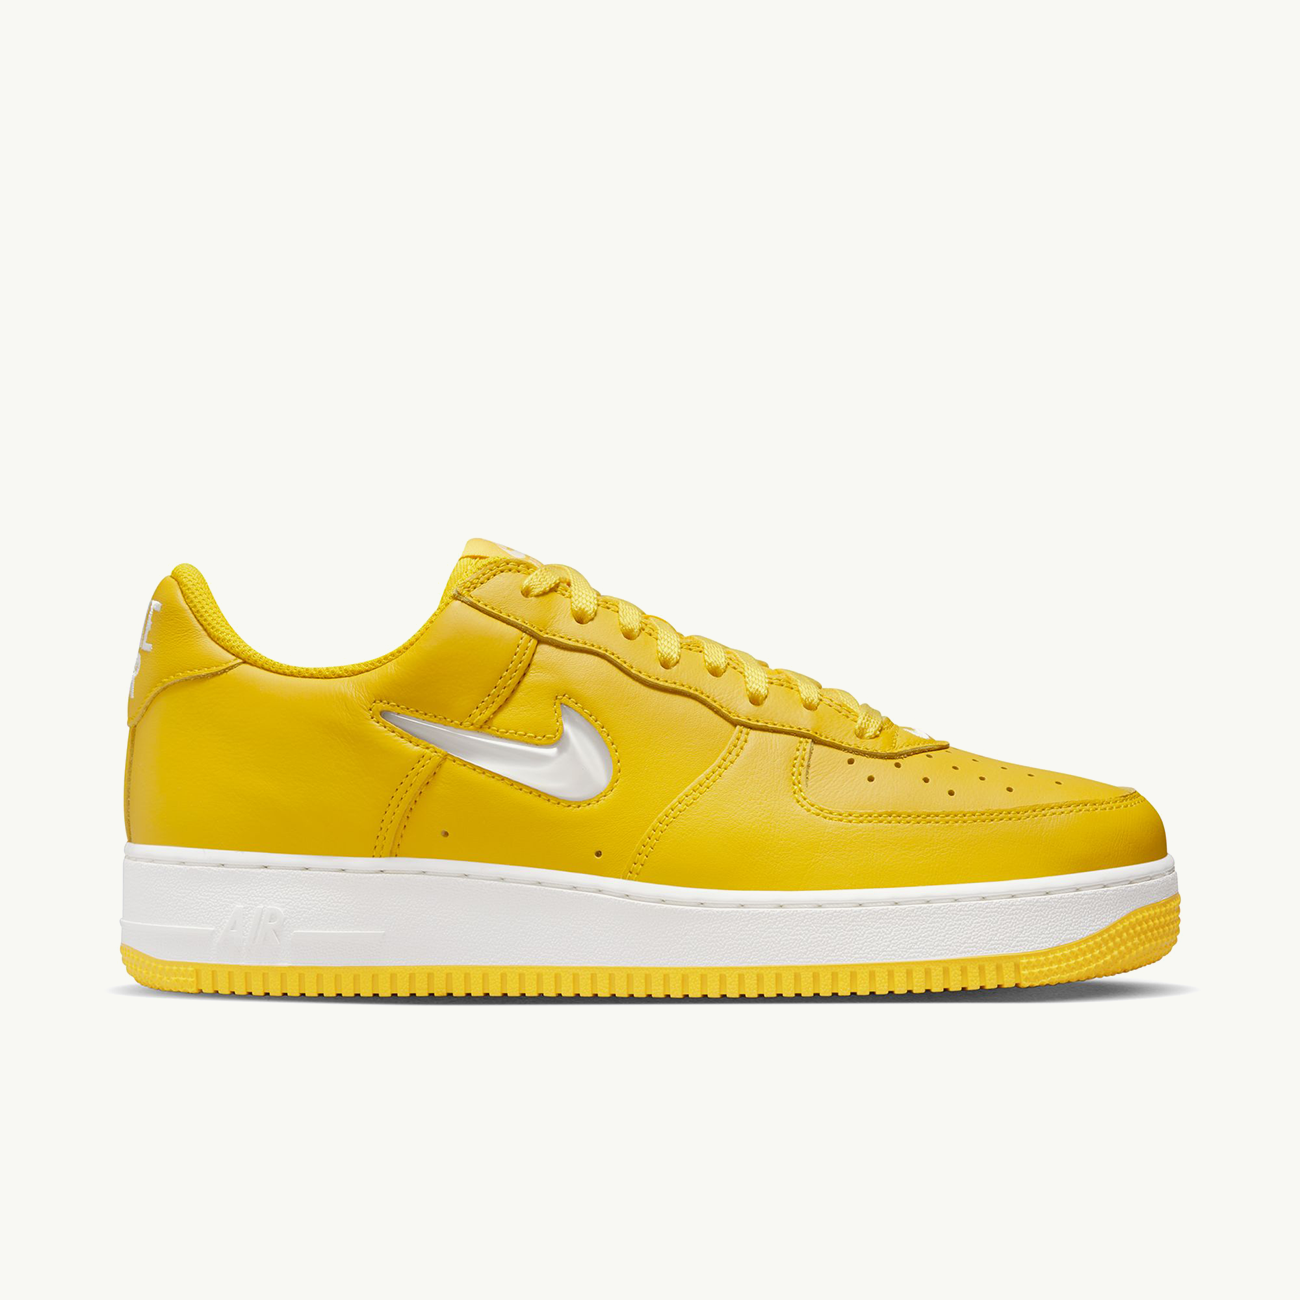 Air Force 1 Low Retro - Summit White/Speed Yellow